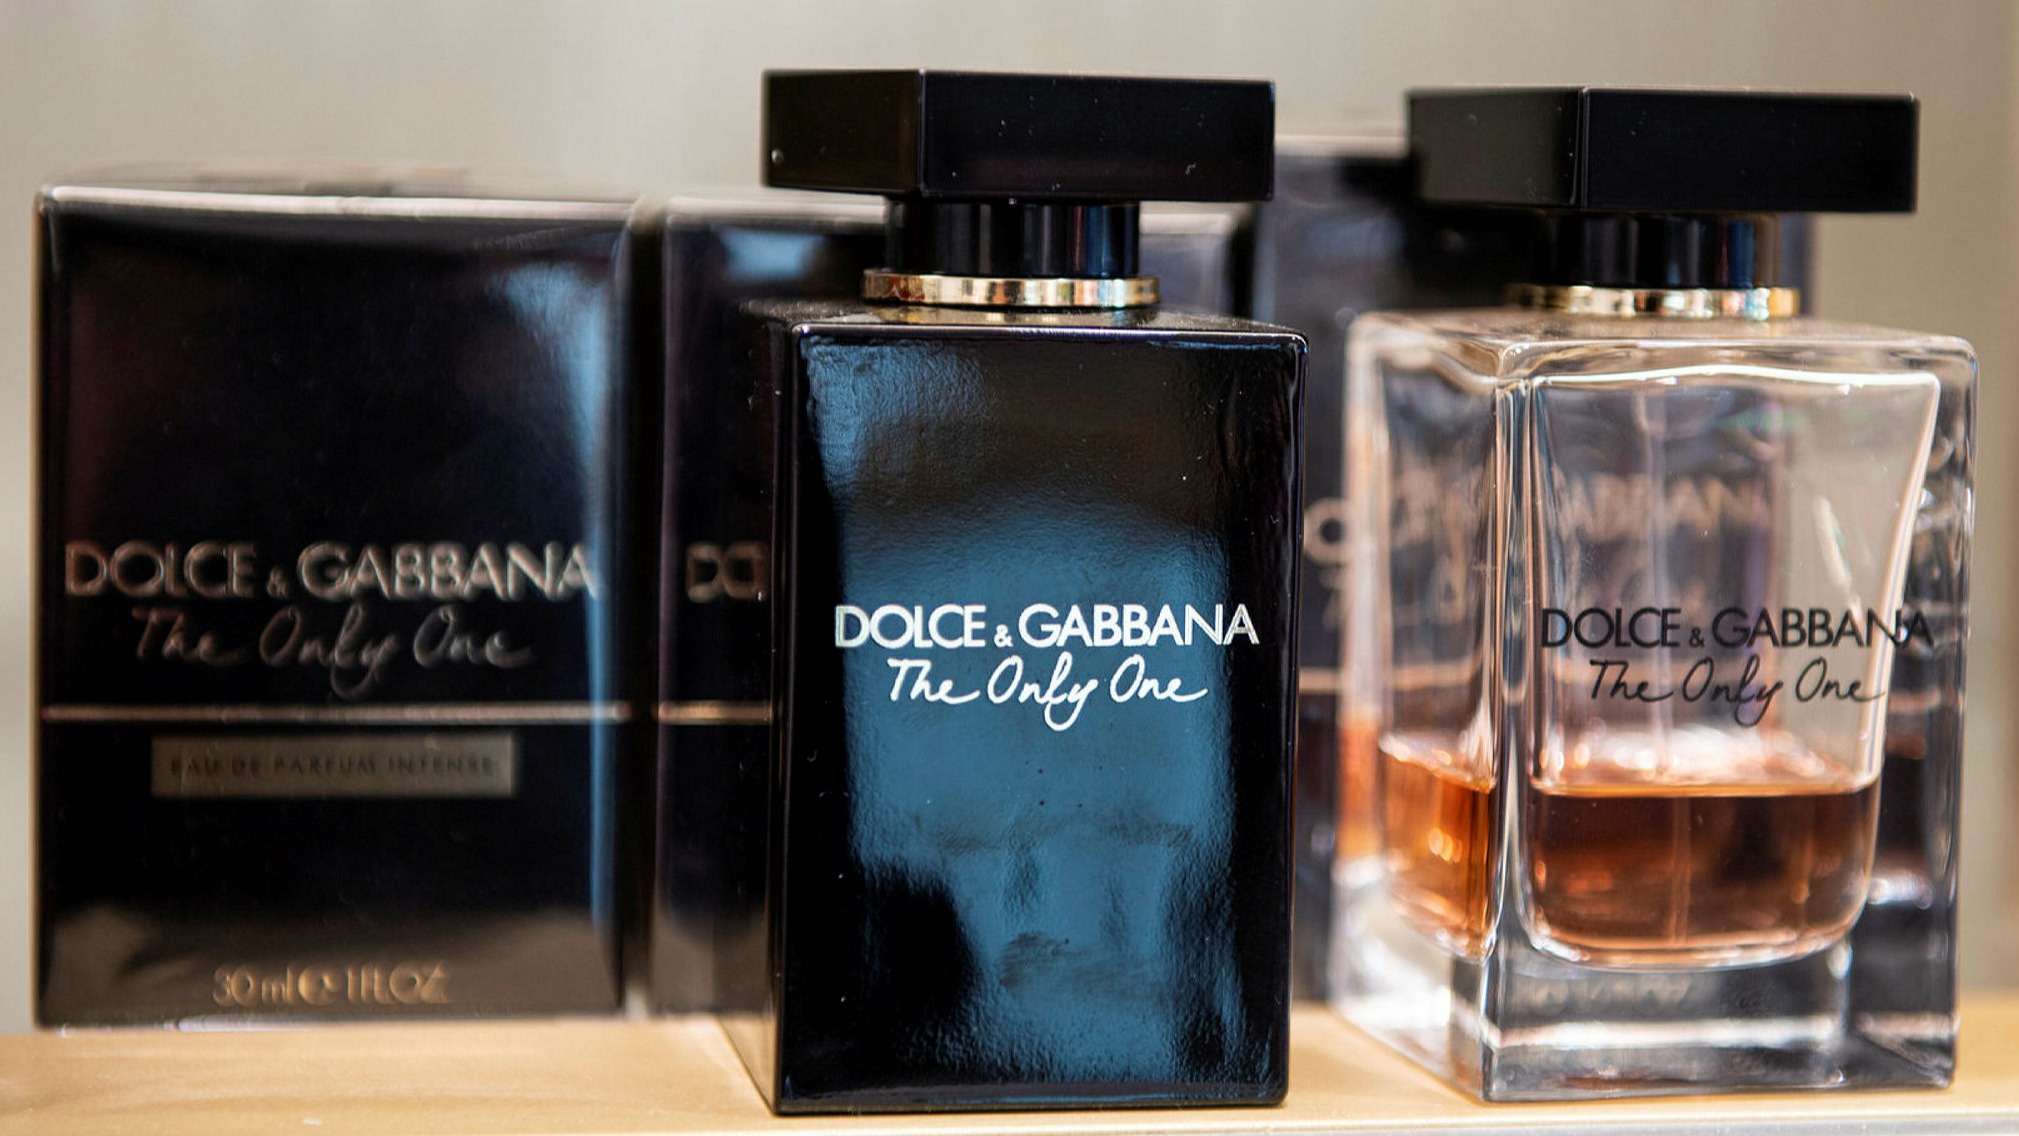 Dolce & Gabbana to take beauty business in-house | Financial Times